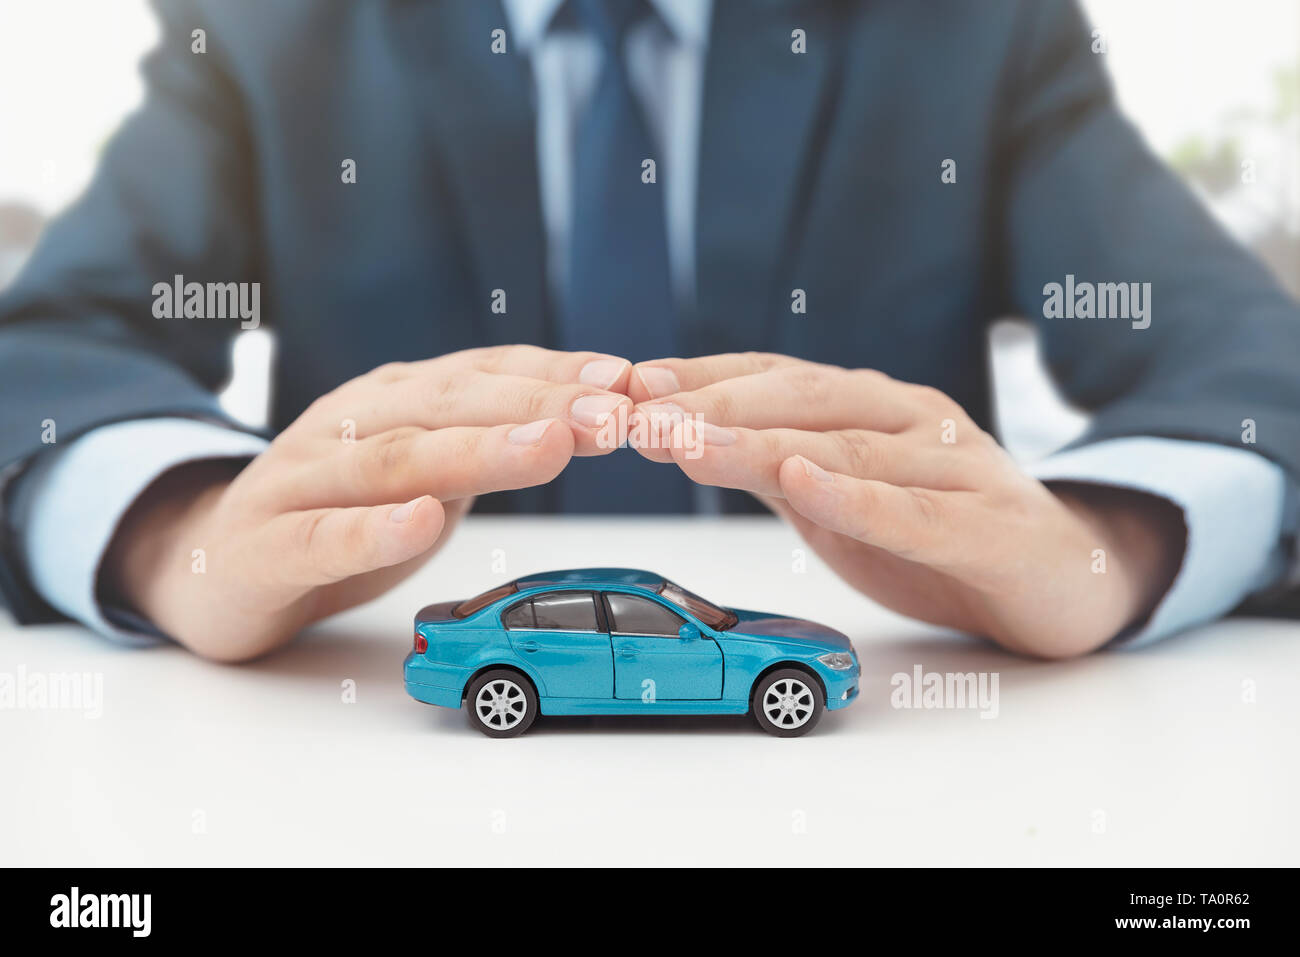 Car insurance, protection and safety concept. Insurance agent protects car with hands. Stock Photo